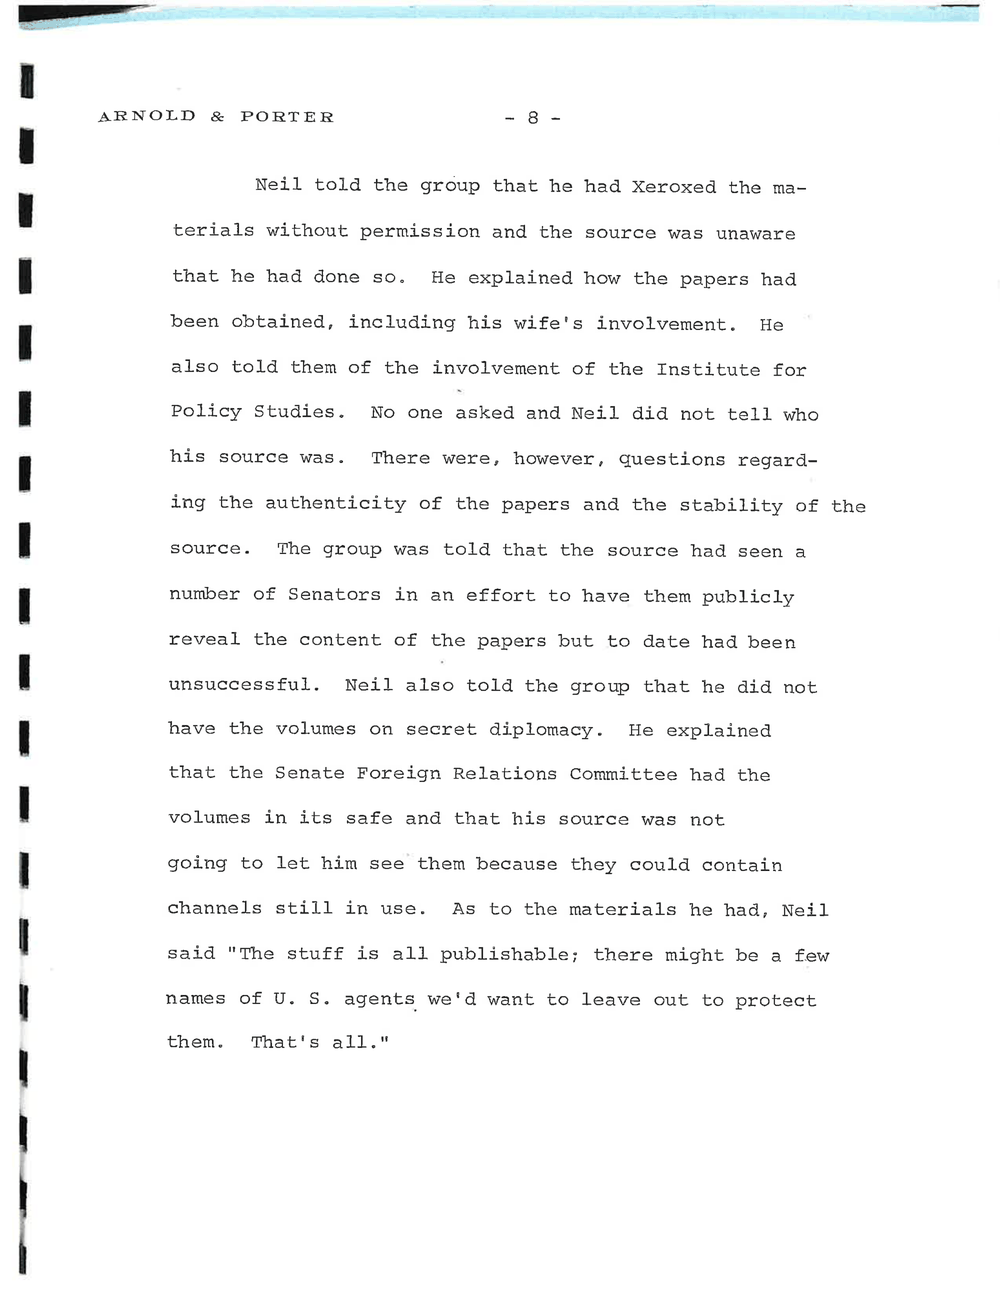 Page 8 from Rogovin Sheehan memo